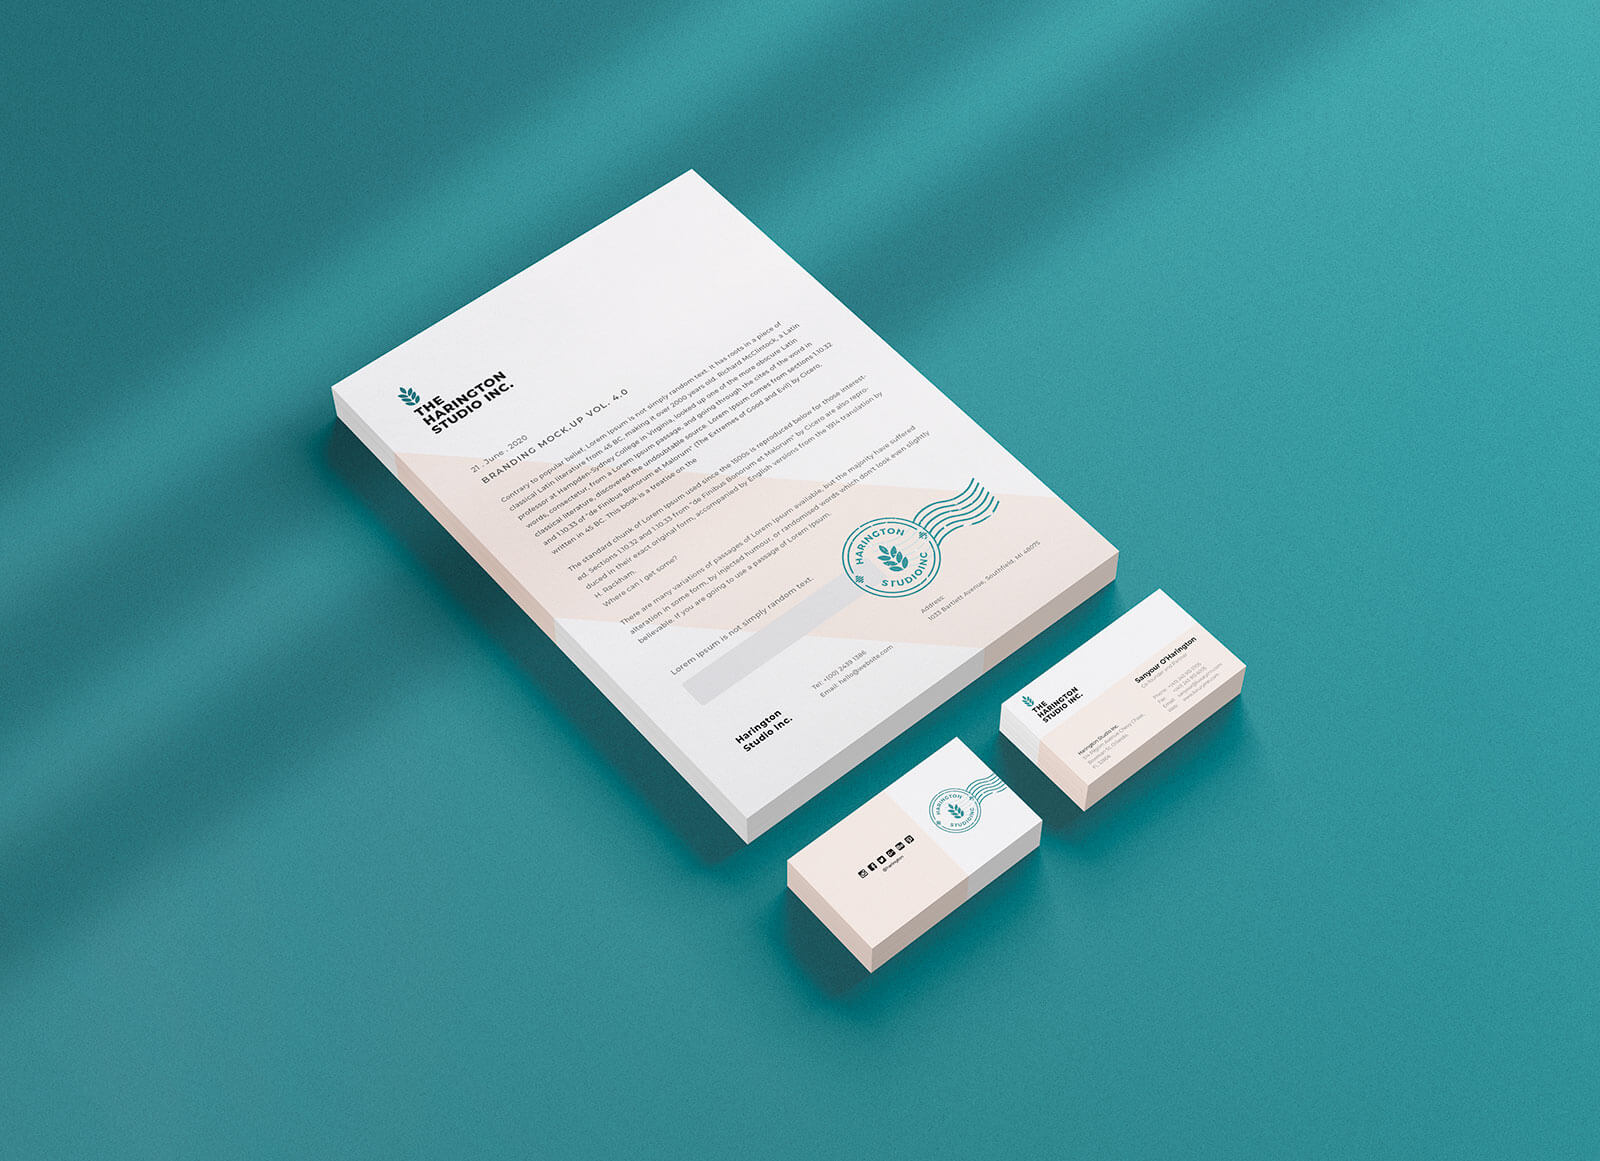 Download Free Isometric Stacked Letterhead & Business Card ...